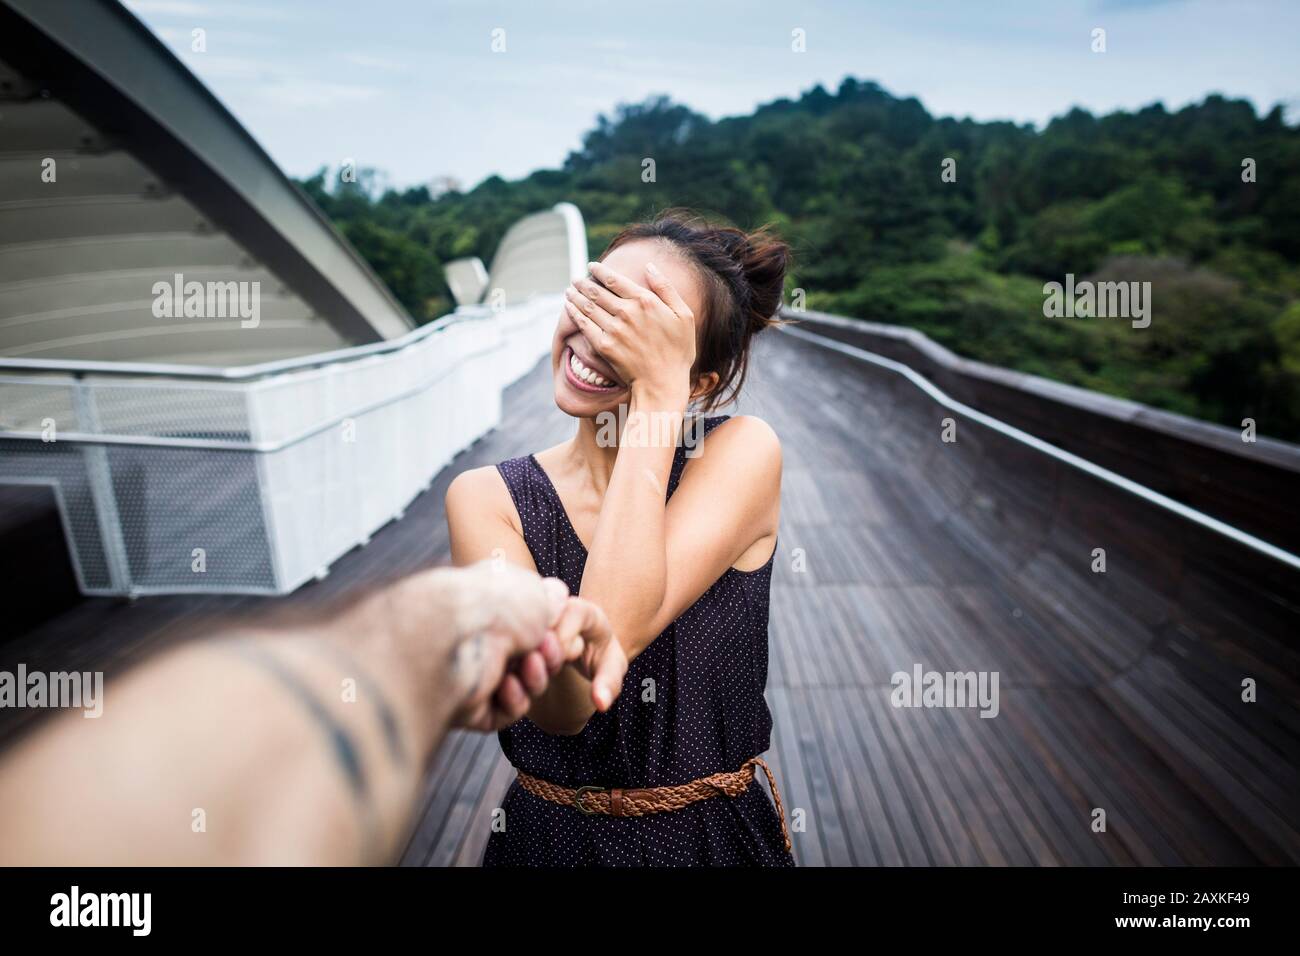 Smiling young woman standing on a bridge, covering her face, holding man's hand. Stock Photo